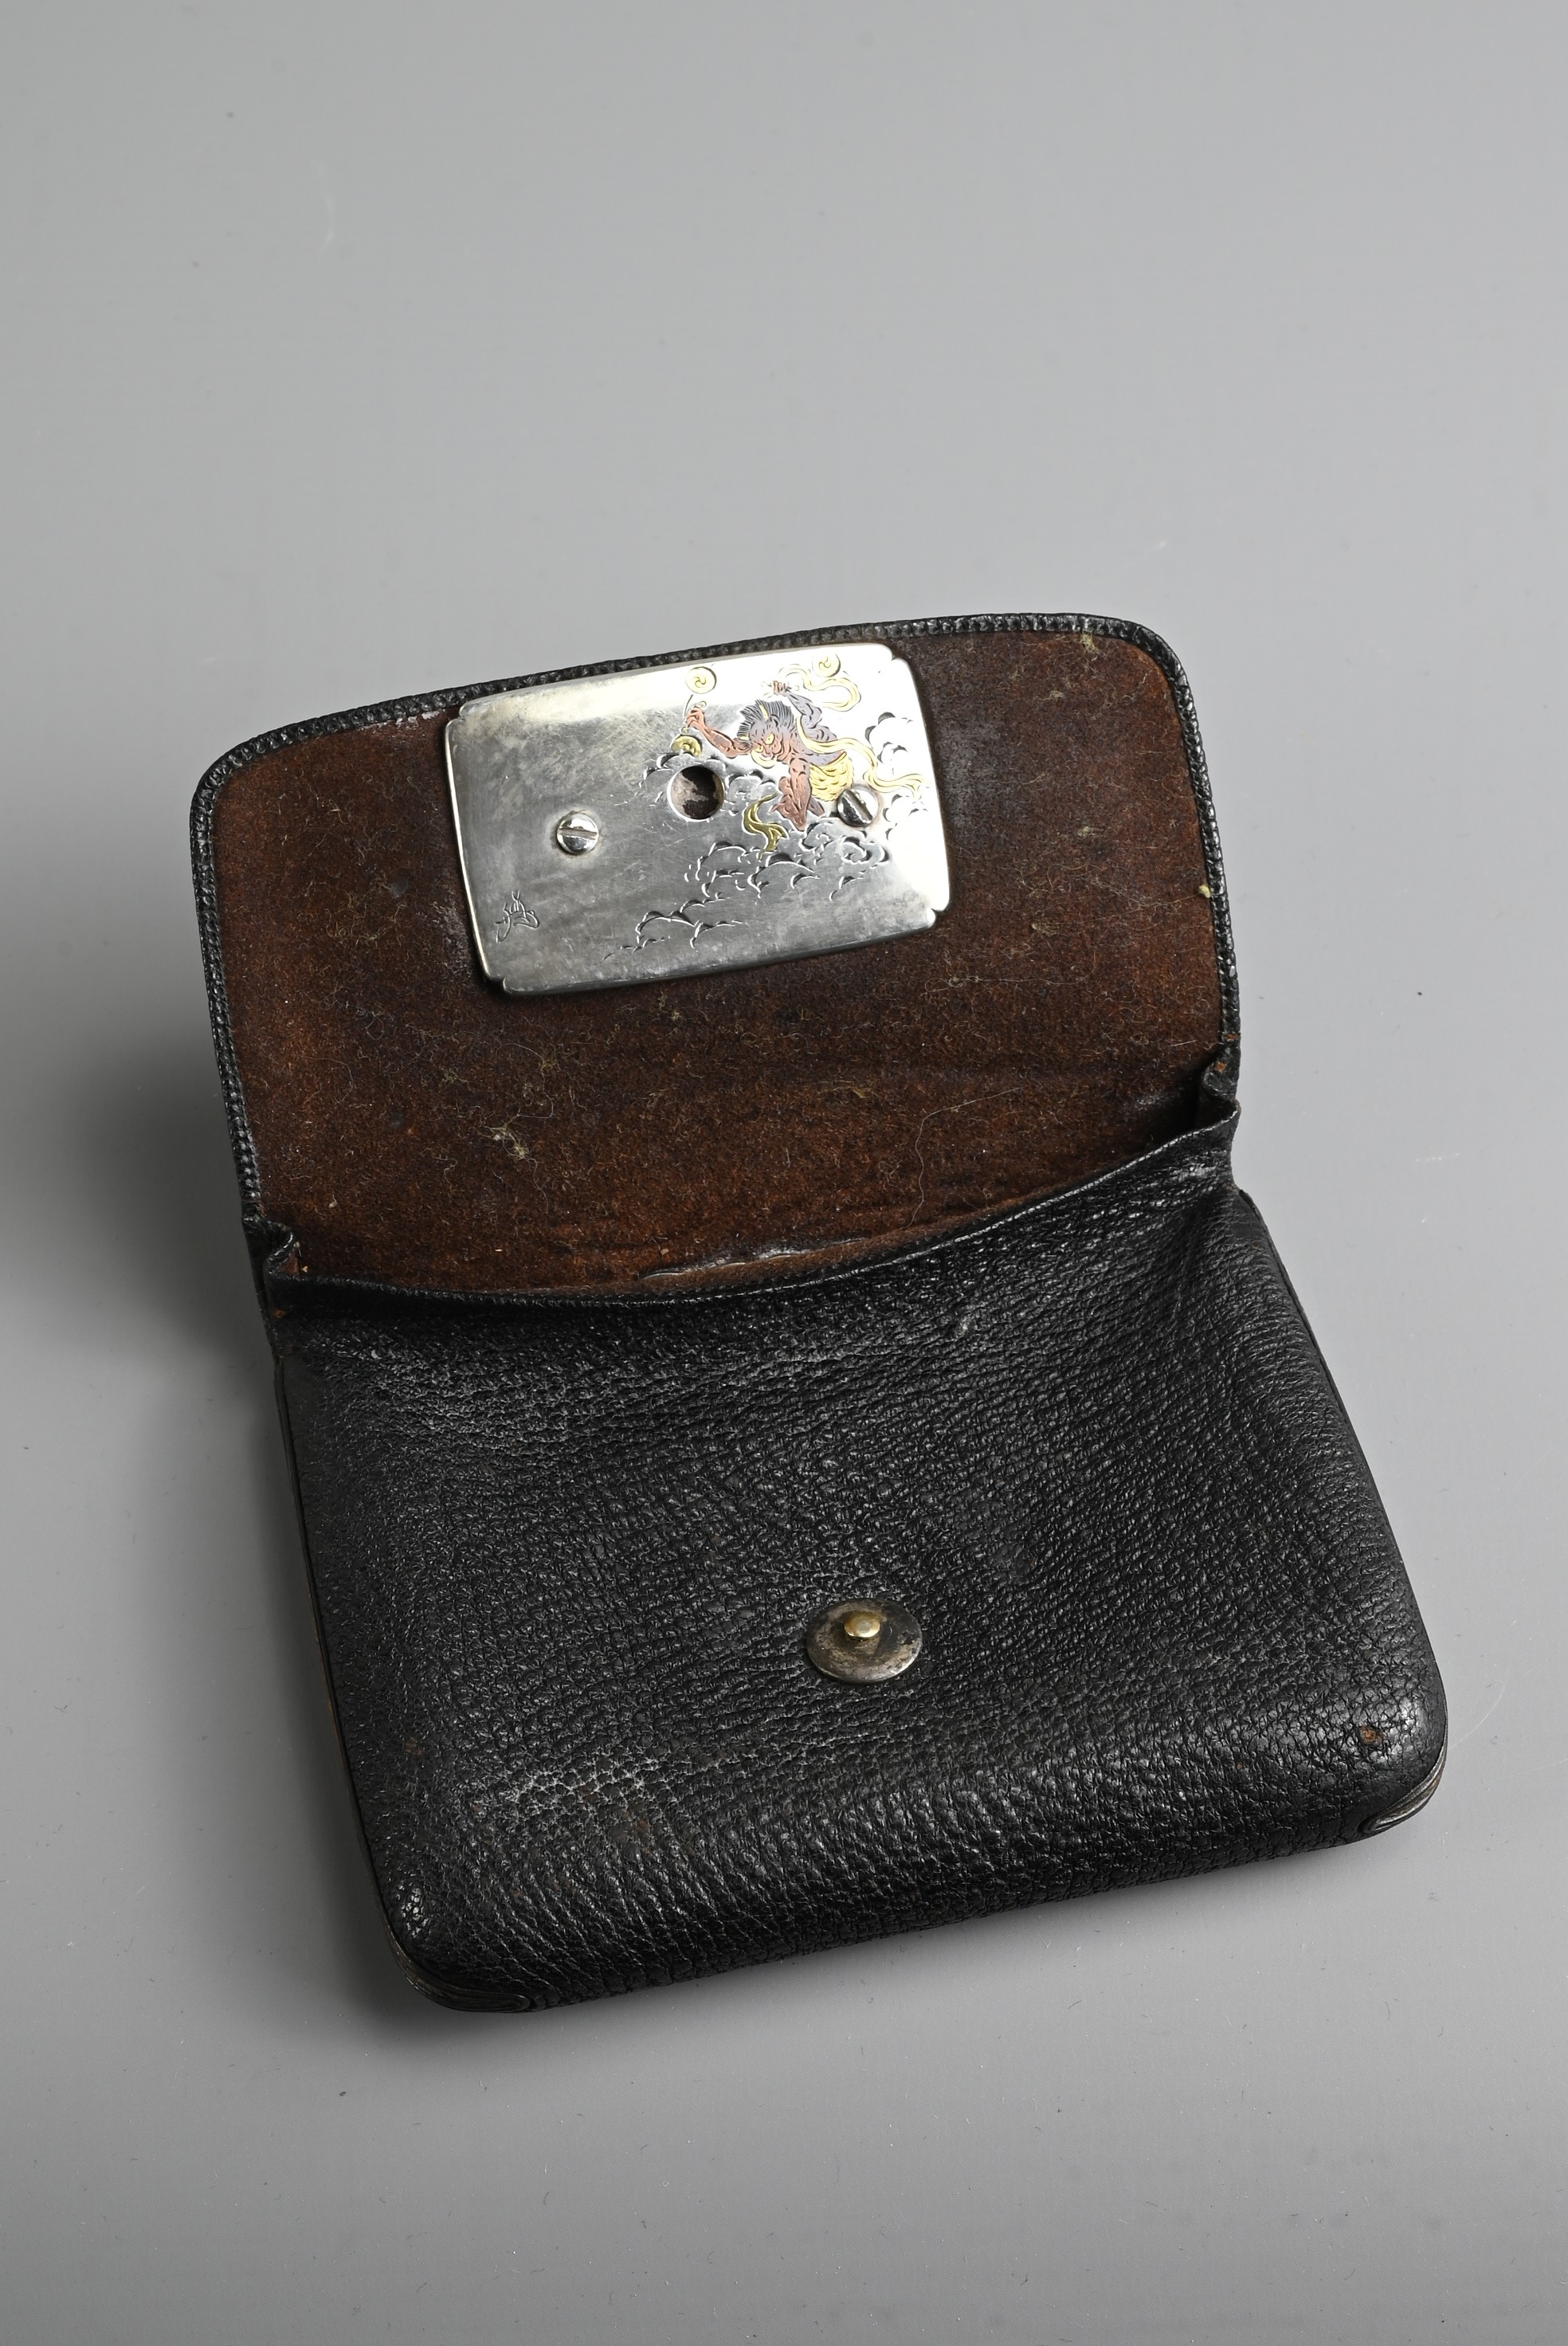 A JAPANESE MEIJI PERIOD (1868-1912) BLACK LEATHER COIN POUCH (FUKURO) WITH SILVER-COLOURED METAL - Image 5 of 6